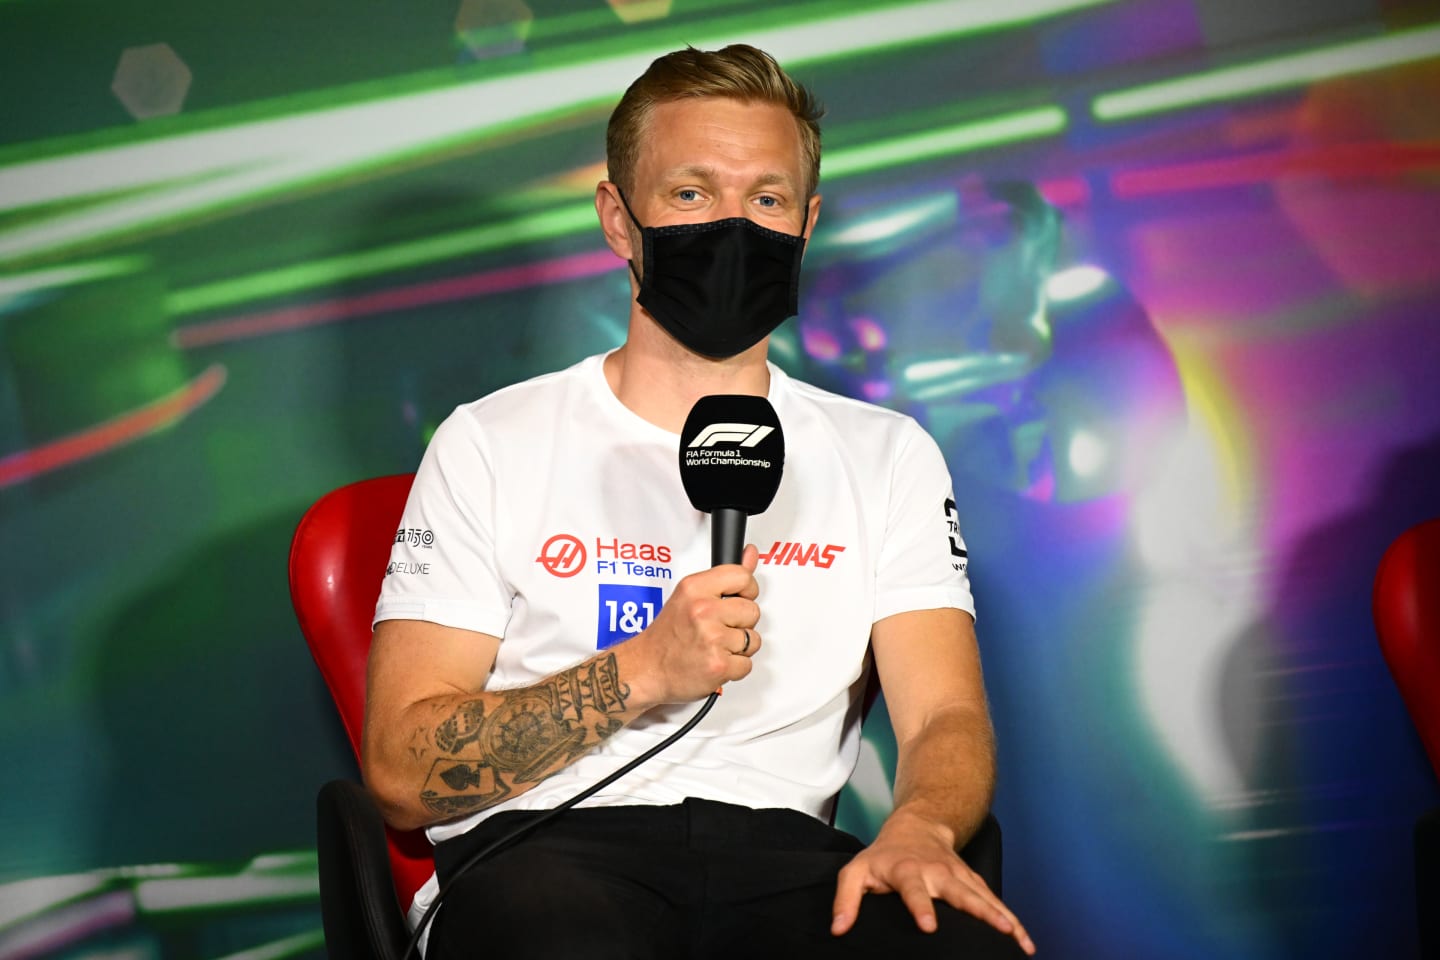 JEDDAH, SAUDI ARABIA - MARCH 25: Kevin Magnussen of Denmark and Haas F1 talks in the Drivers Press Conference before practice ahead of the F1 Grand Prix of Saudi Arabia at the Jeddah Corniche Circuit on March 25, 2022 in Jeddah, Saudi Arabia. (Photo by Clive Mason/Getty Images)